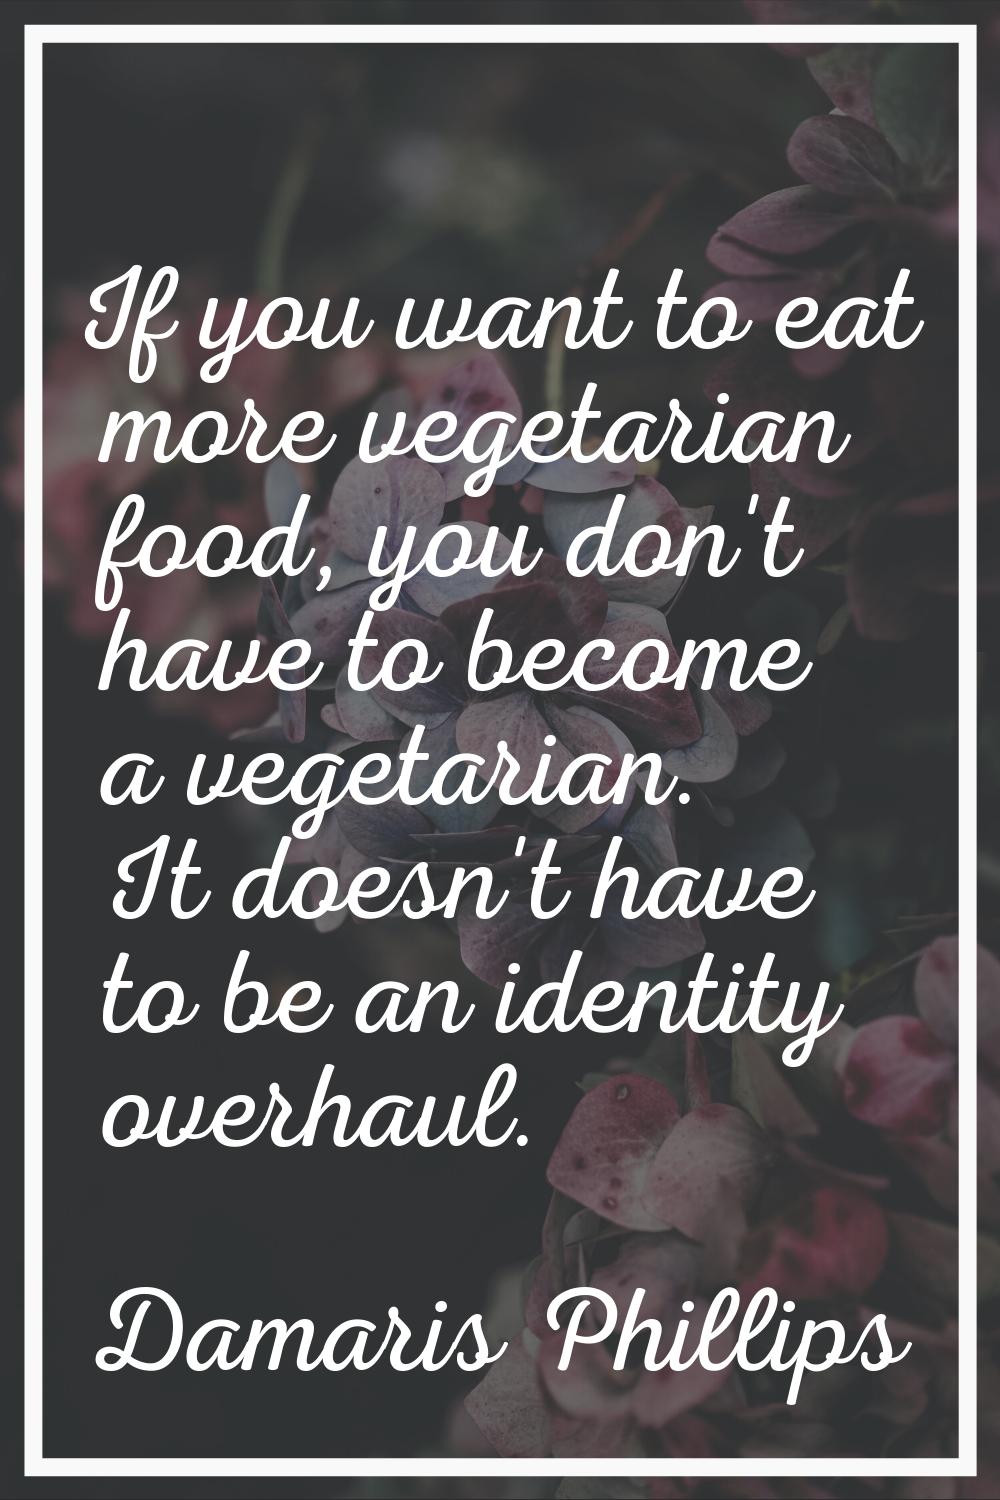 If you want to eat more vegetarian food, you don't have to become a vegetarian. It doesn't have to 